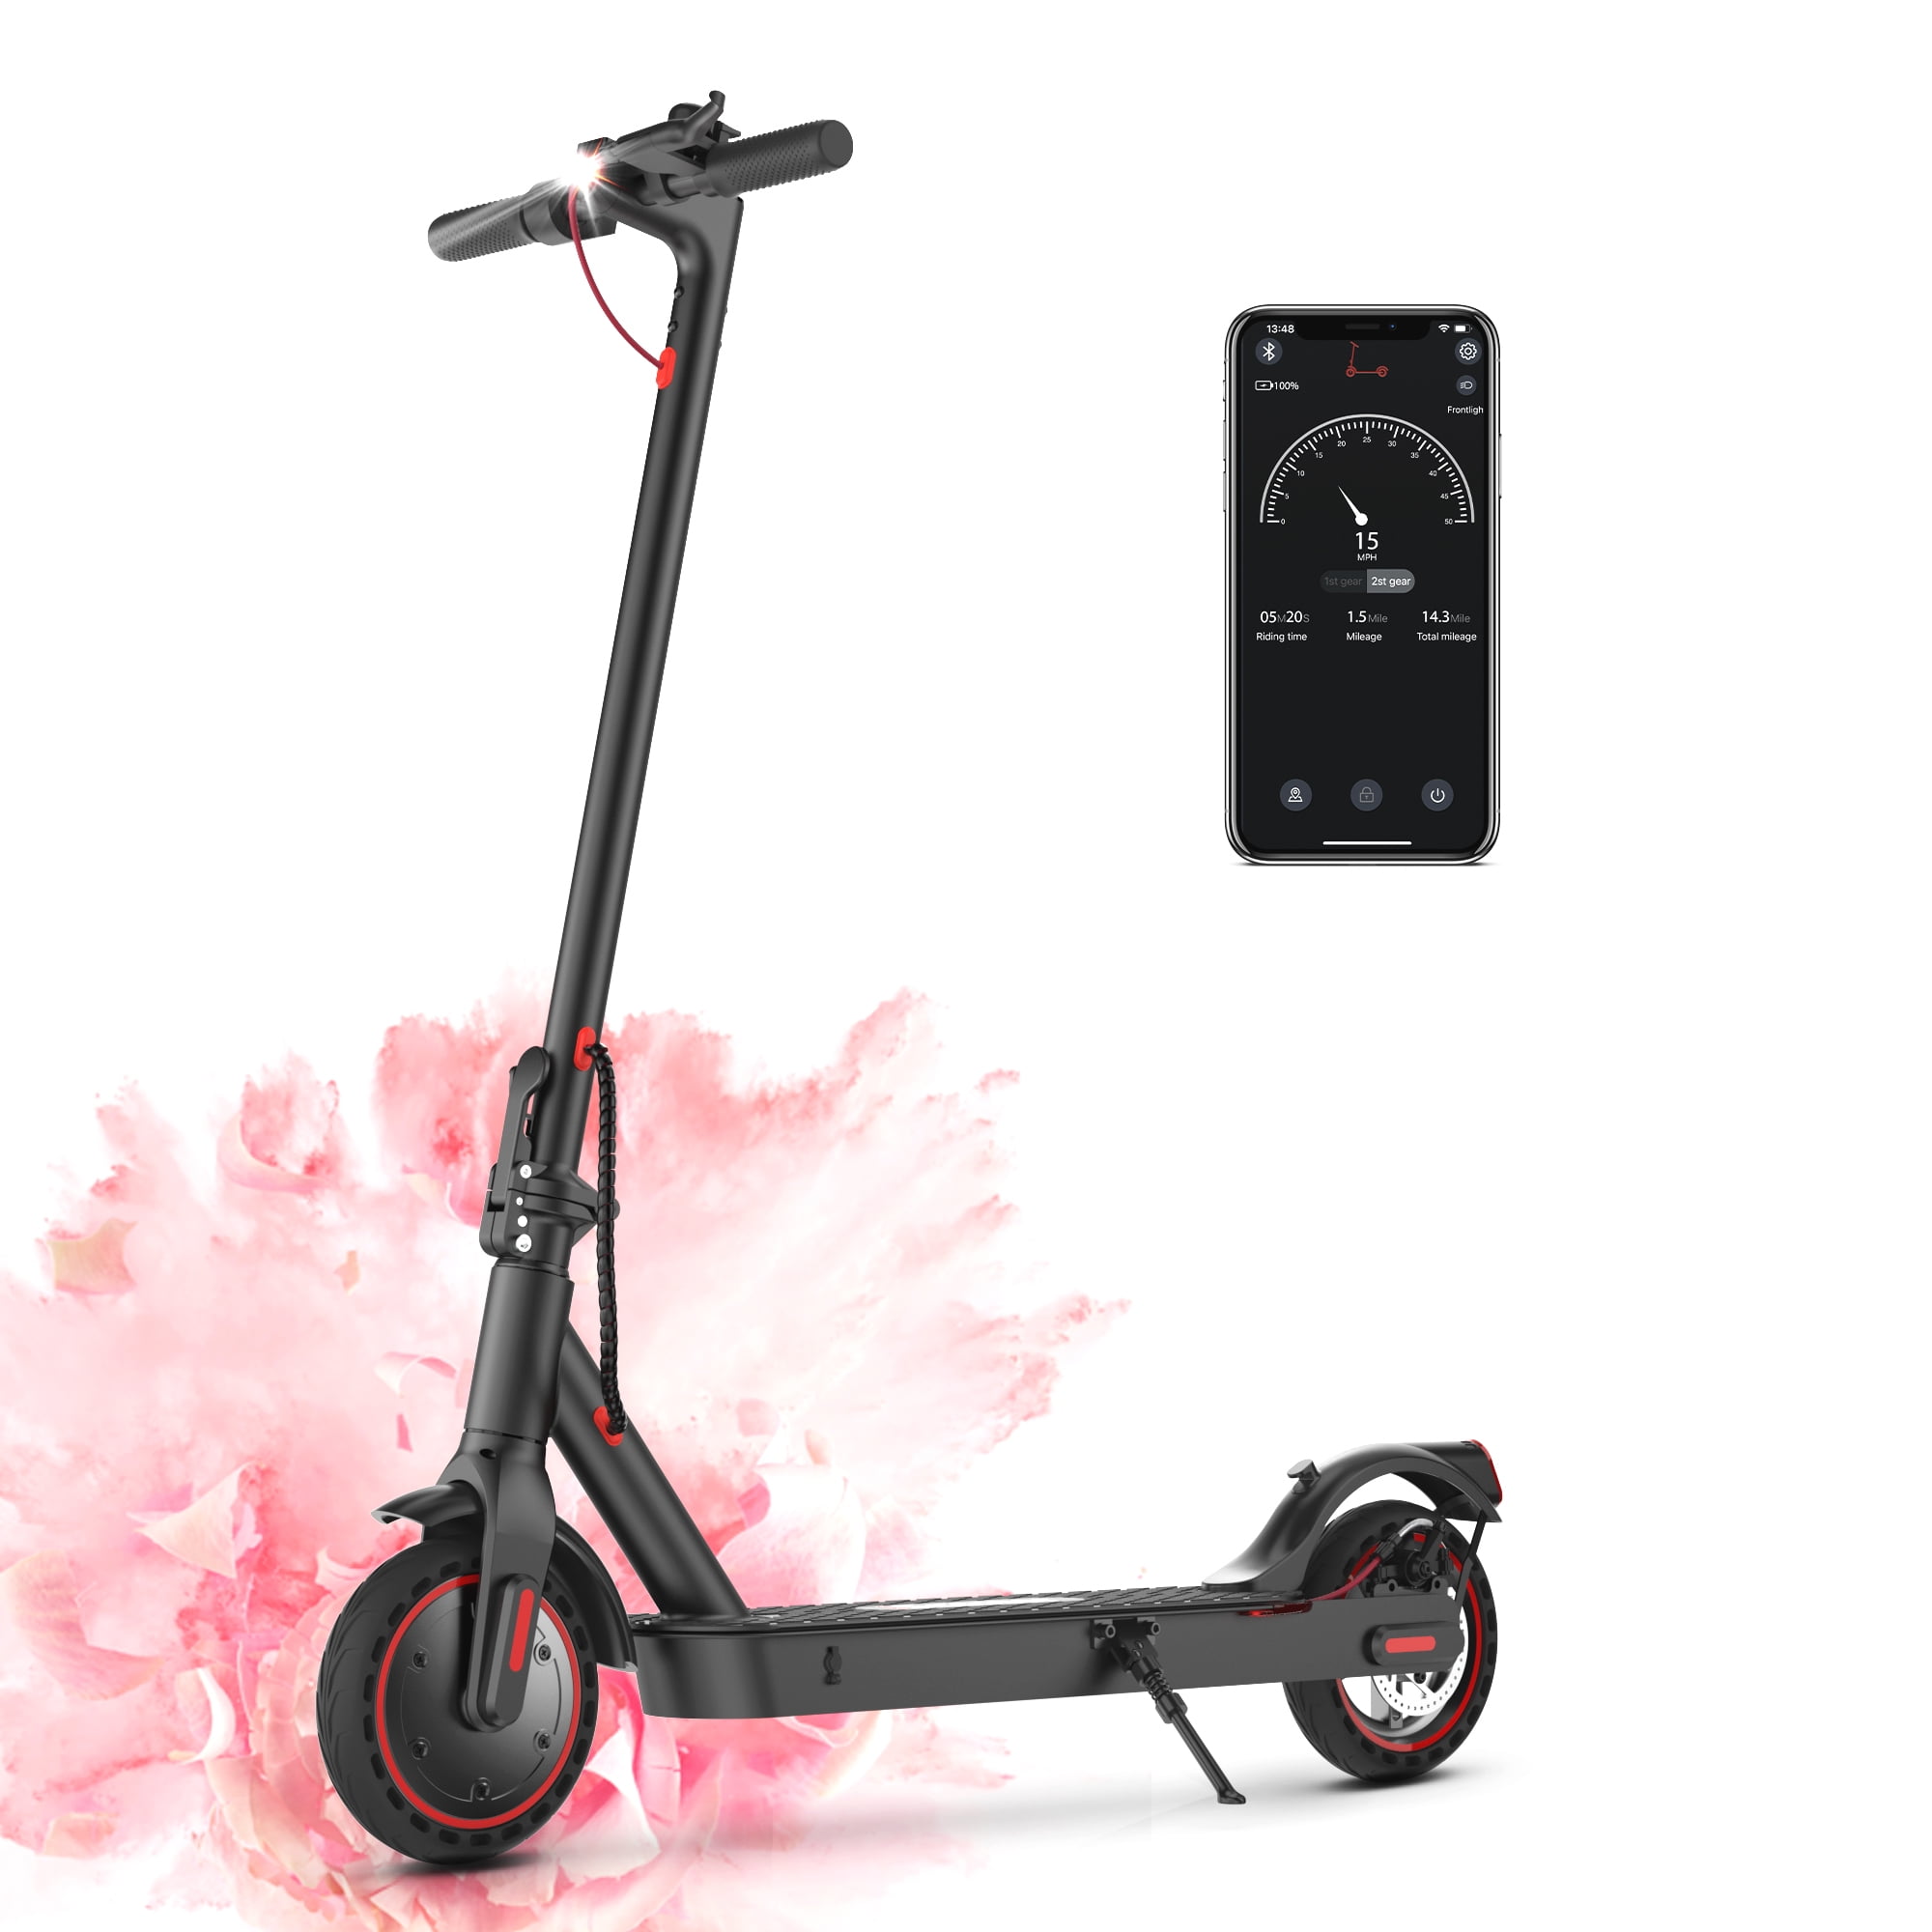 GYROOR C1 450W Electric Scooter Seat for Adults, Max Speed 15.5Mph Up to 21 Miles Range, Tire for Commuting with Basket - Walmart.com